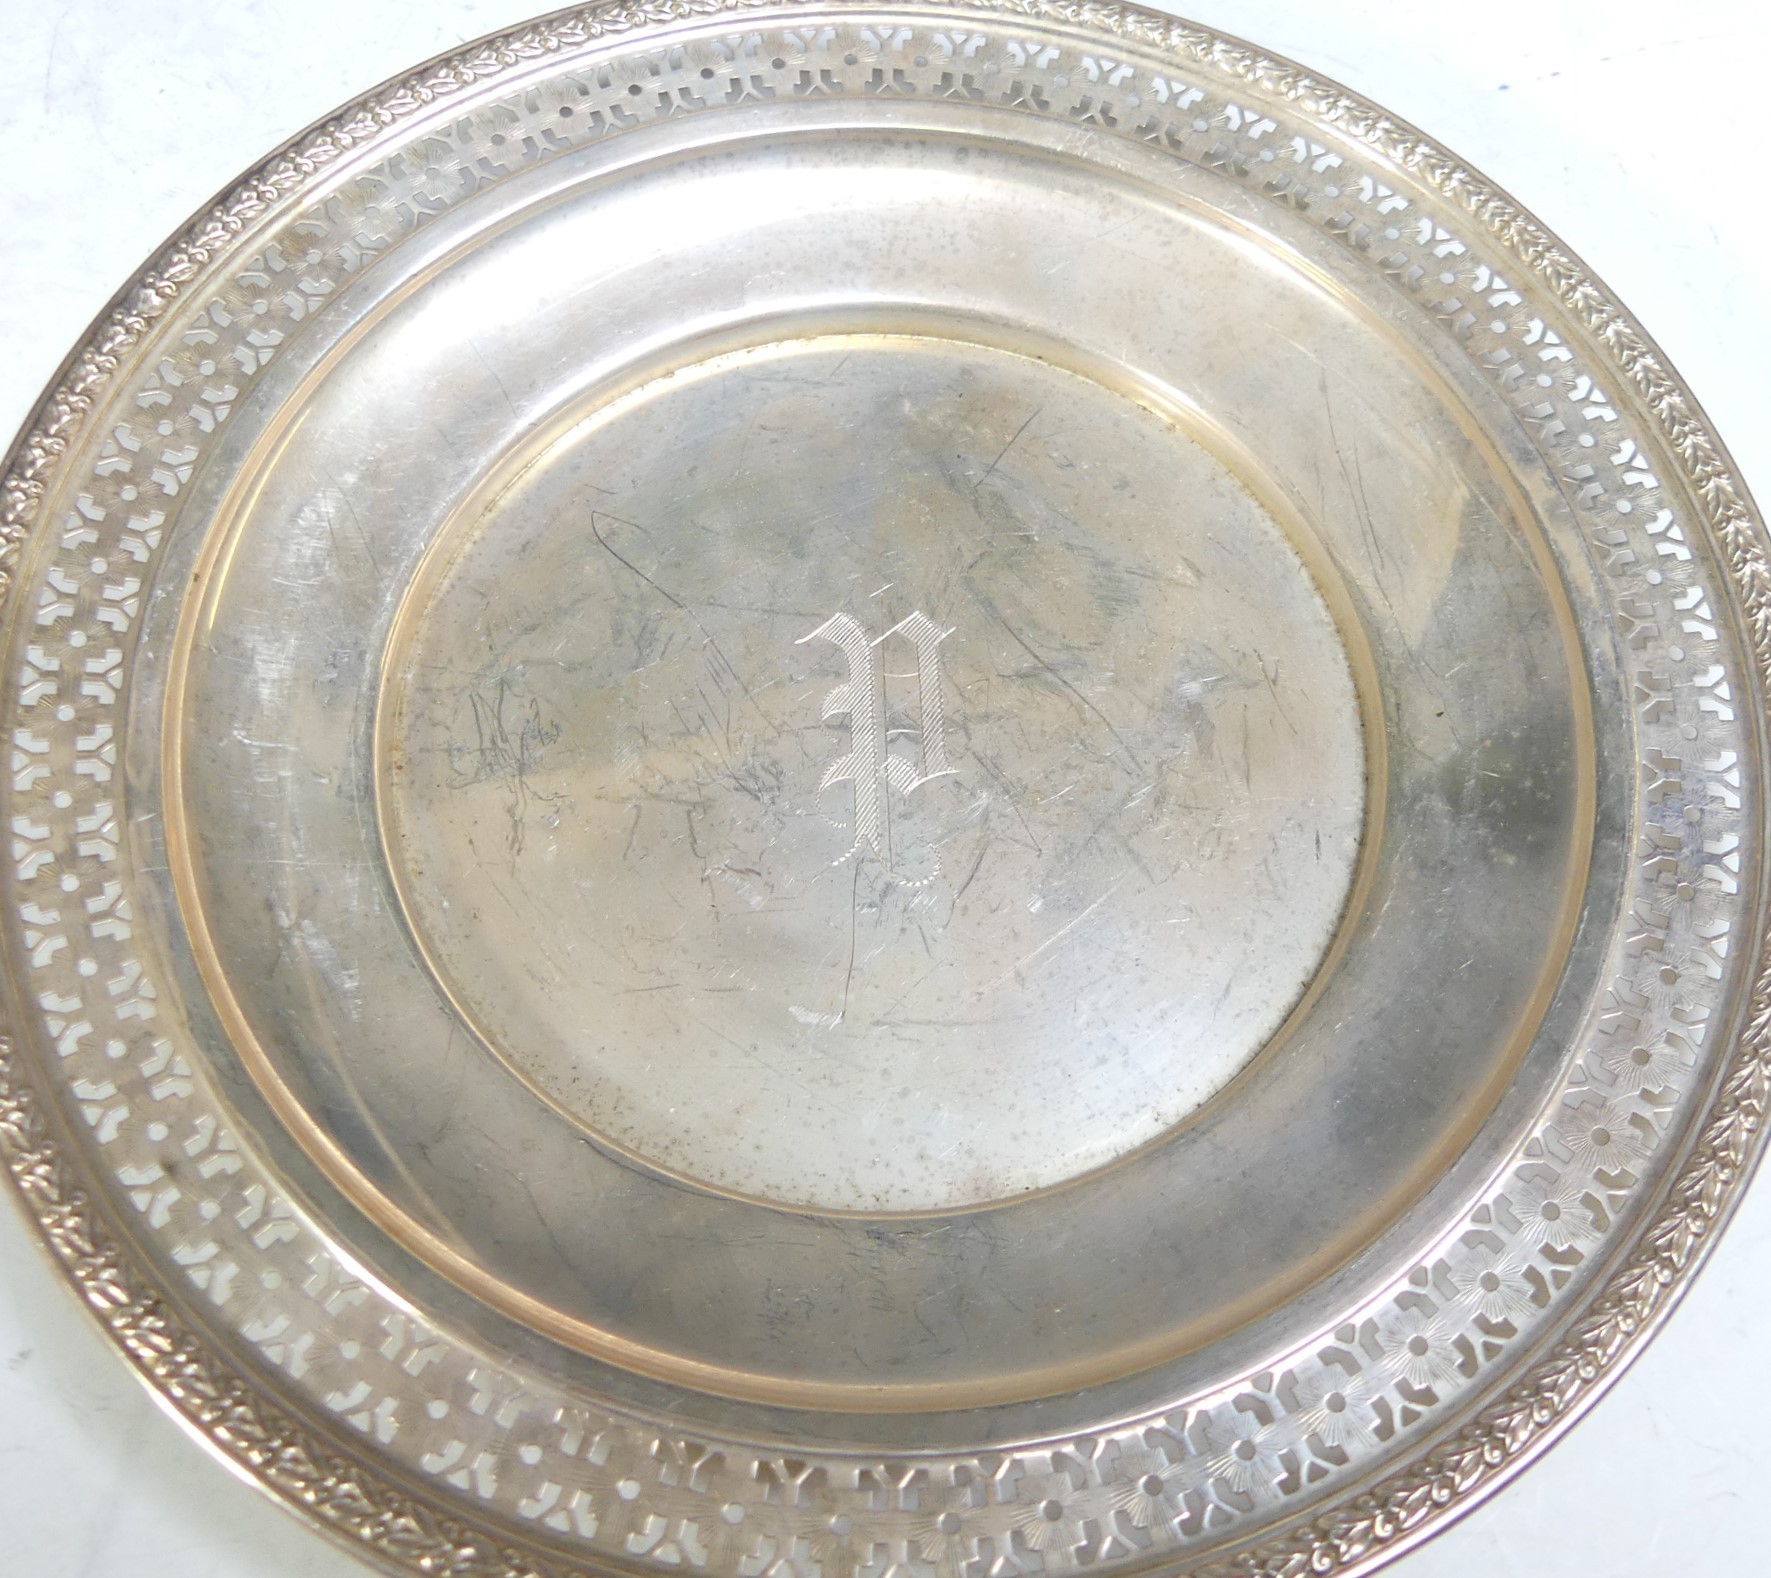 An early 20thC American sterling silver Tazza, by The Sterling Silver MFG Co., Providence RI, of - Image 6 of 8